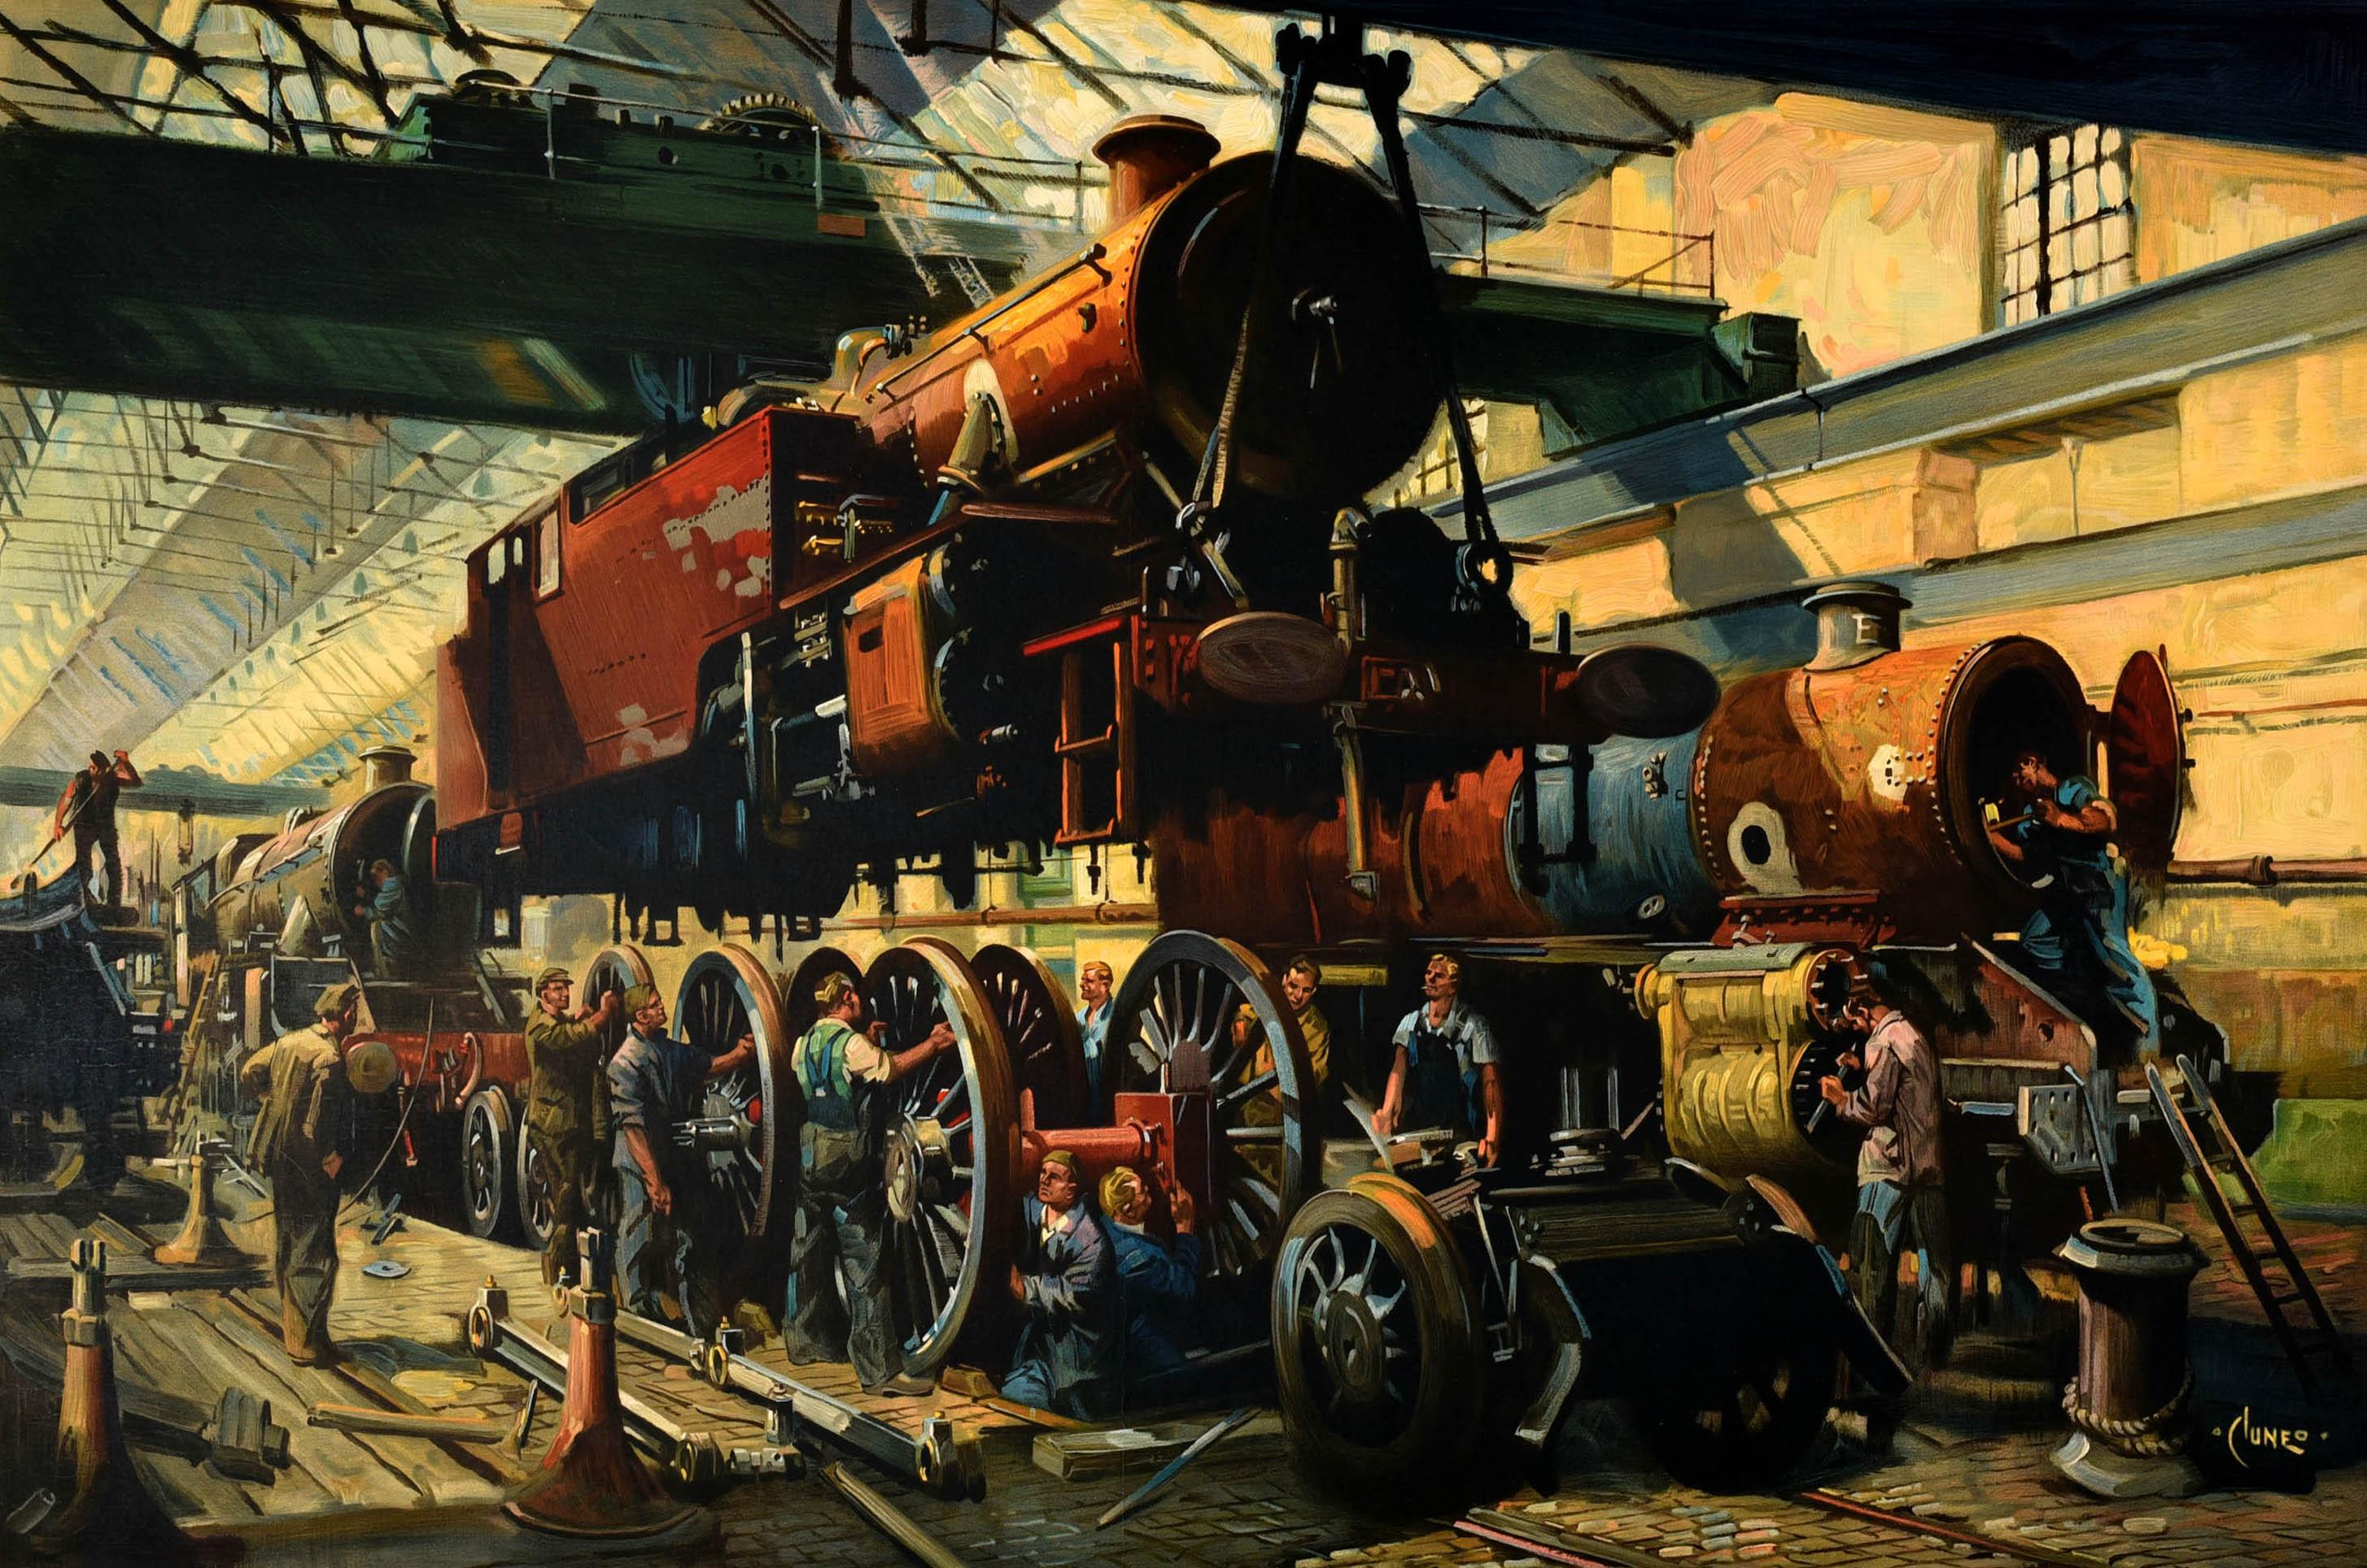 Original vintage British Railways poster - An Engine is Wheeled Derby Locomotive Works - featuring an industrial scene by the notable British artist Terence Tenison Cuneo (1907-1996) depicting a BR Standard 2-6-4 tank engine held by a crane above